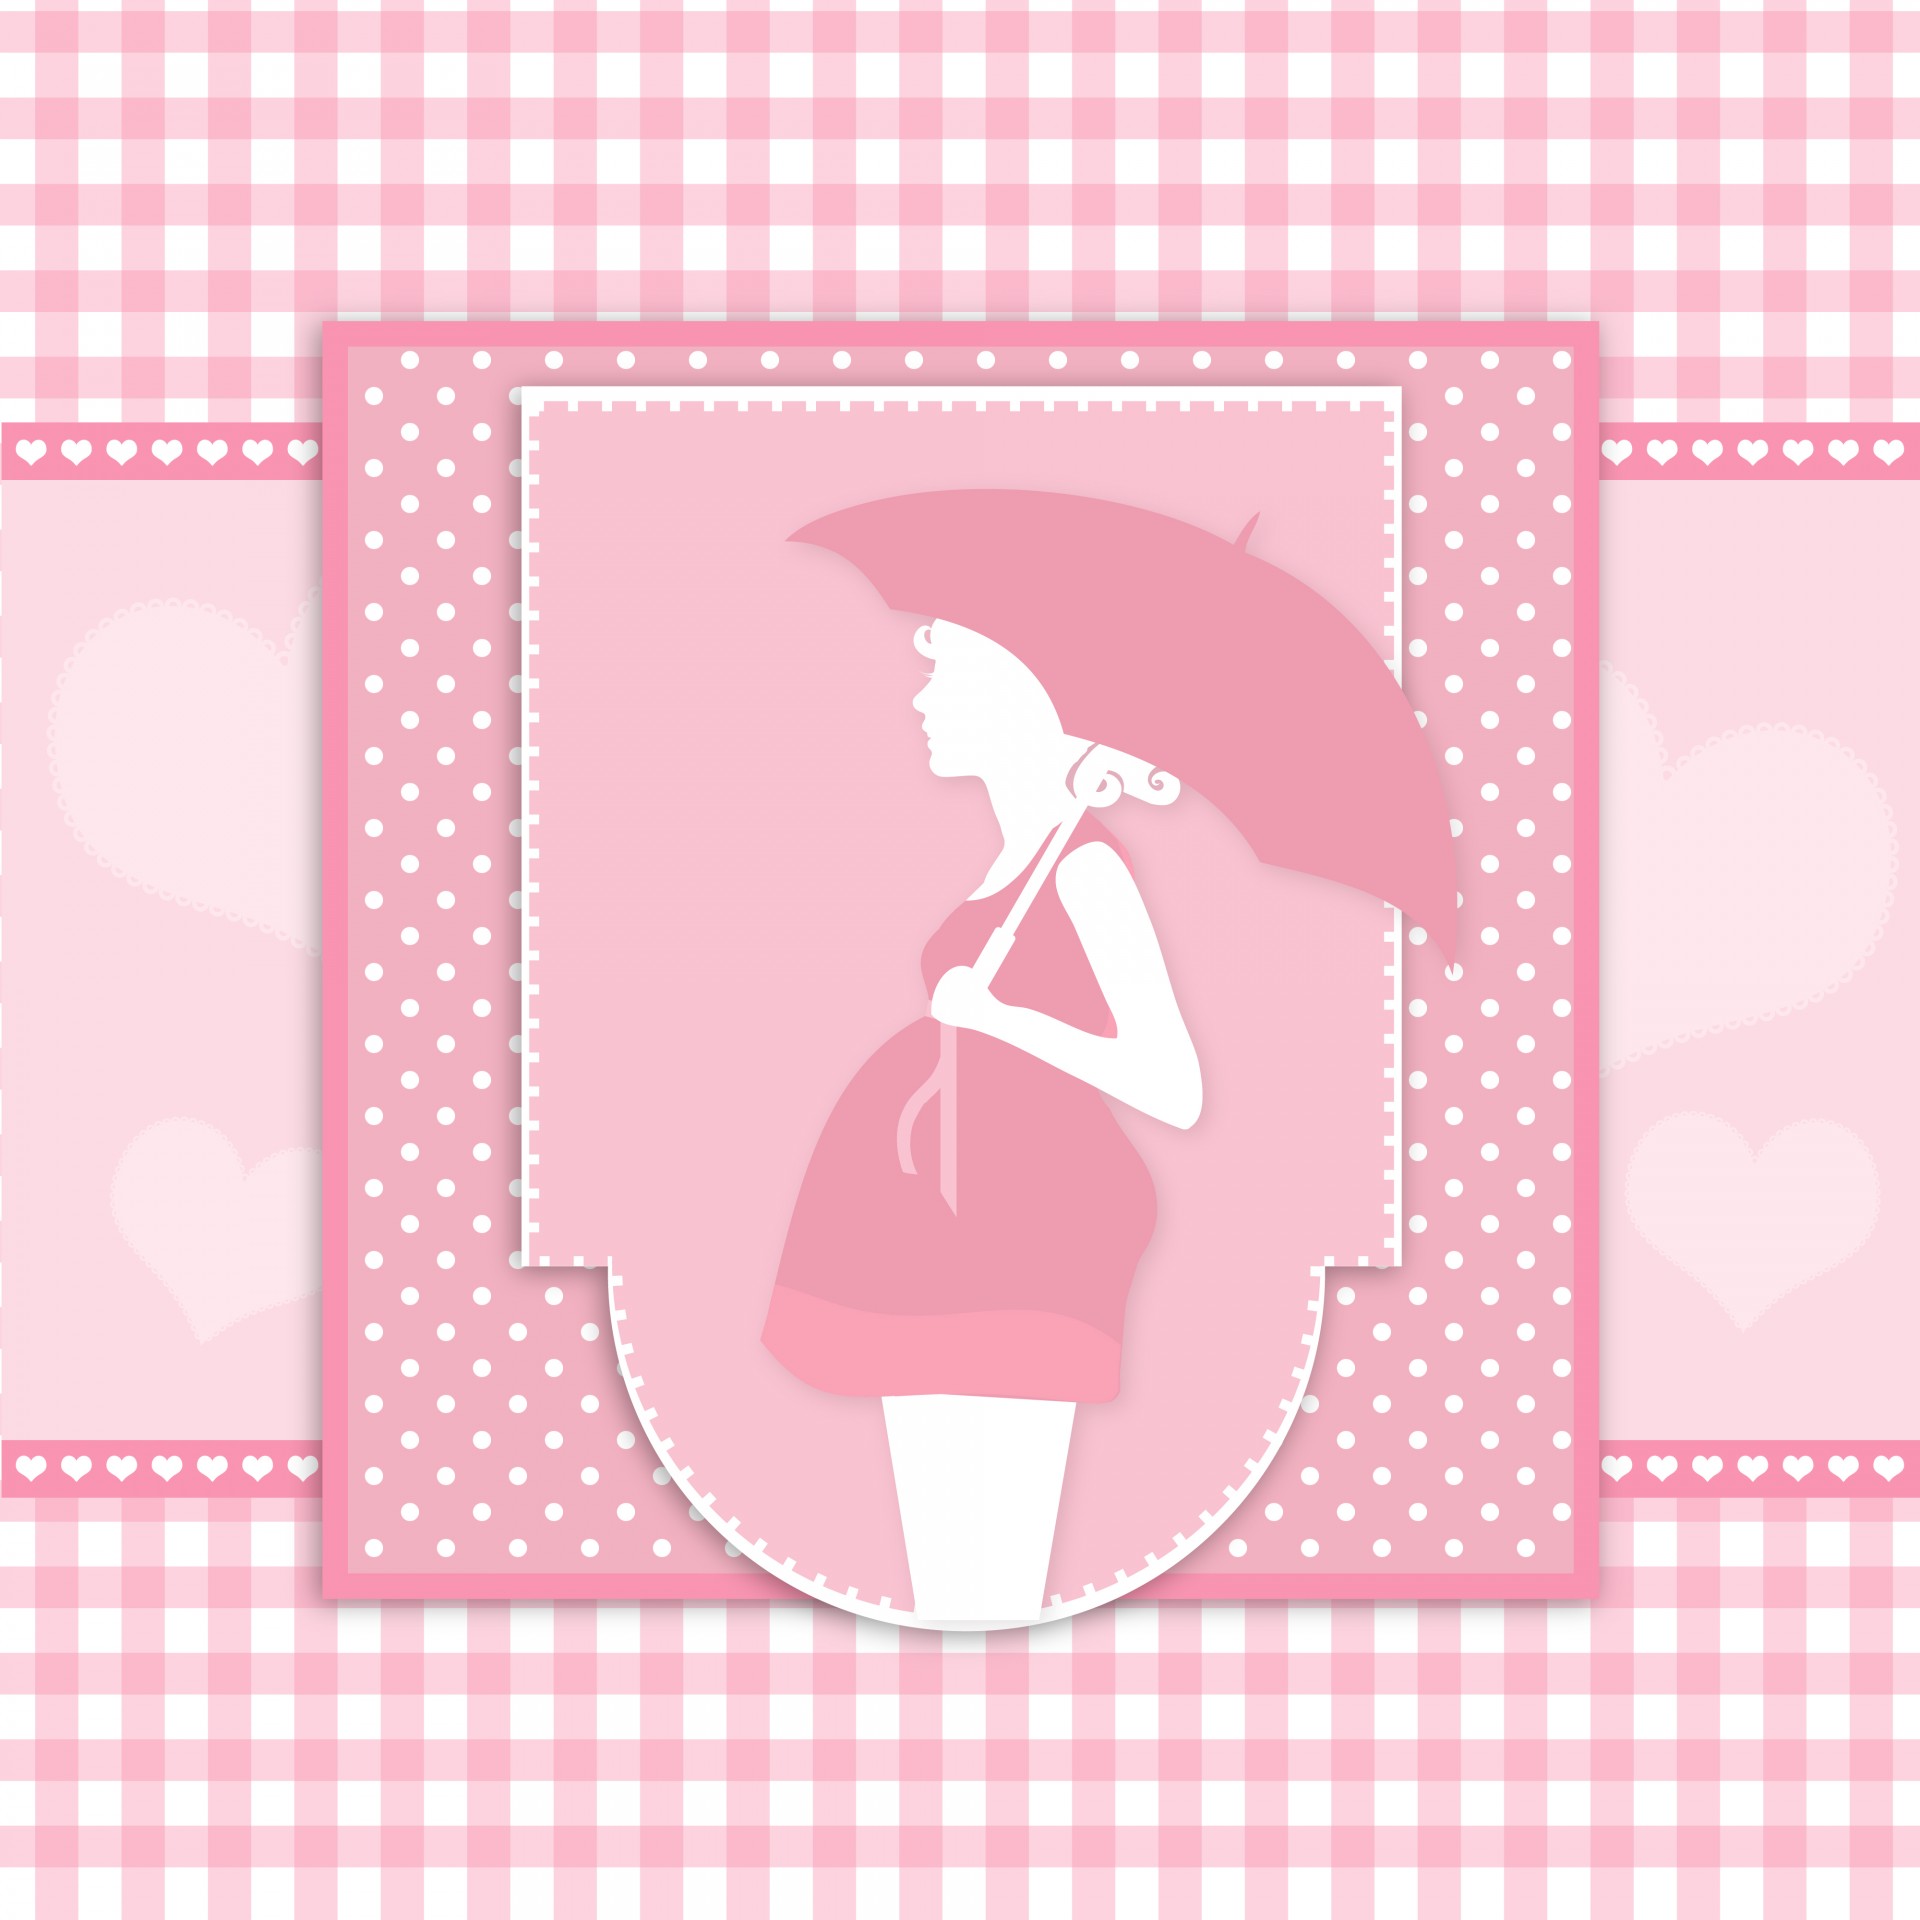 Pretty in pink pregnant woman with umbrella baby shower card template